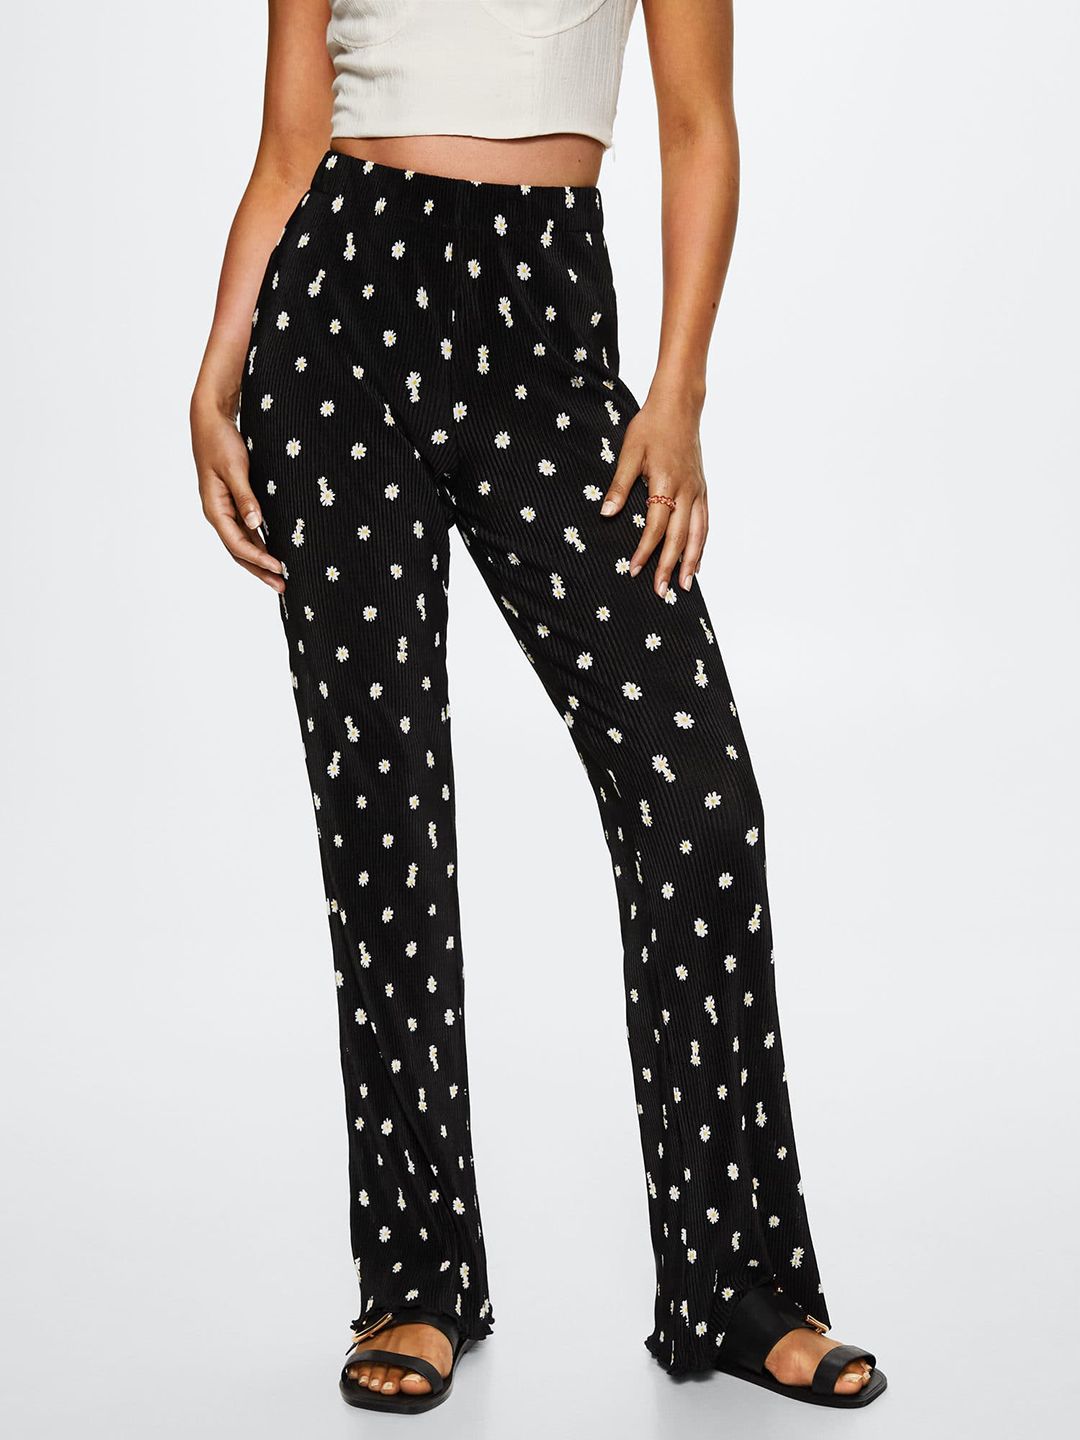 MANGO Women Black Floral Printed Trousers Price in India